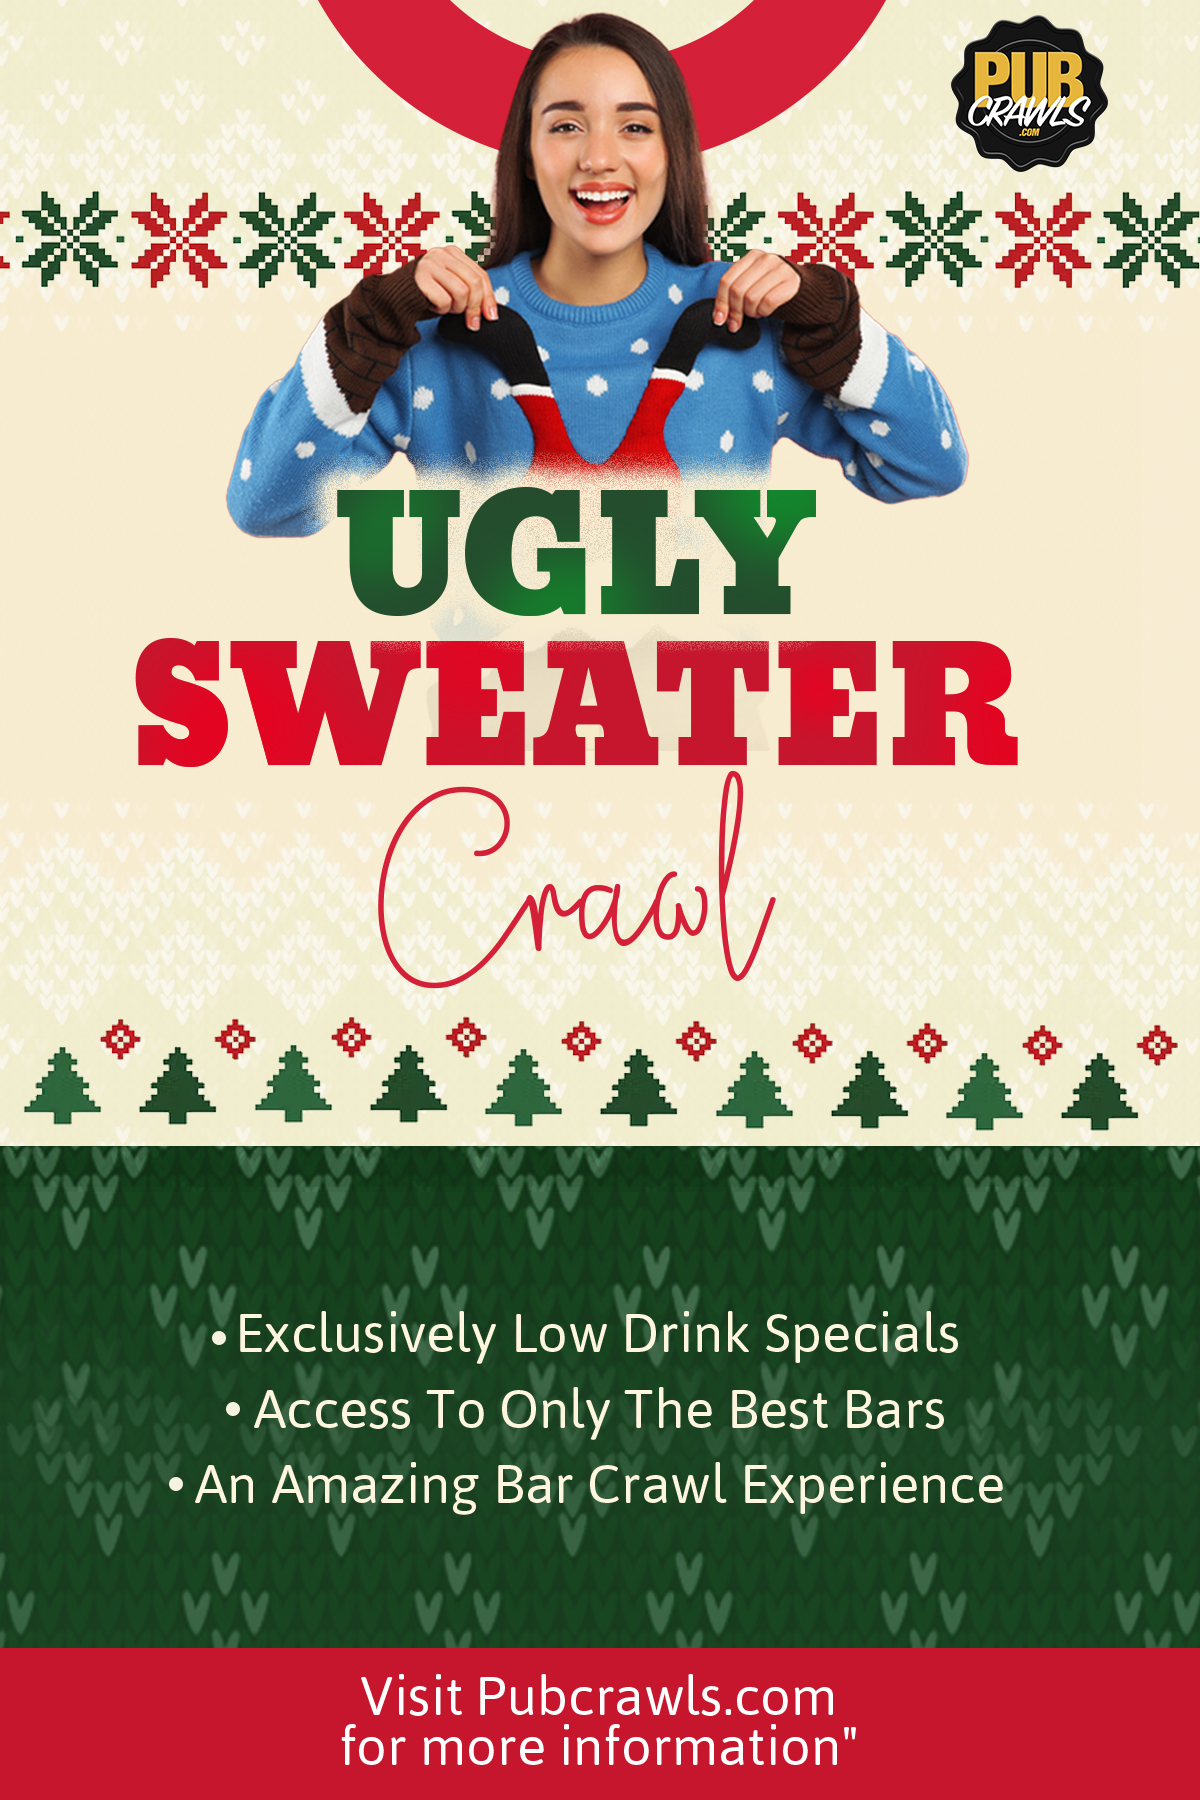 Official Patchogue Ugly Sweater Bar Crawl